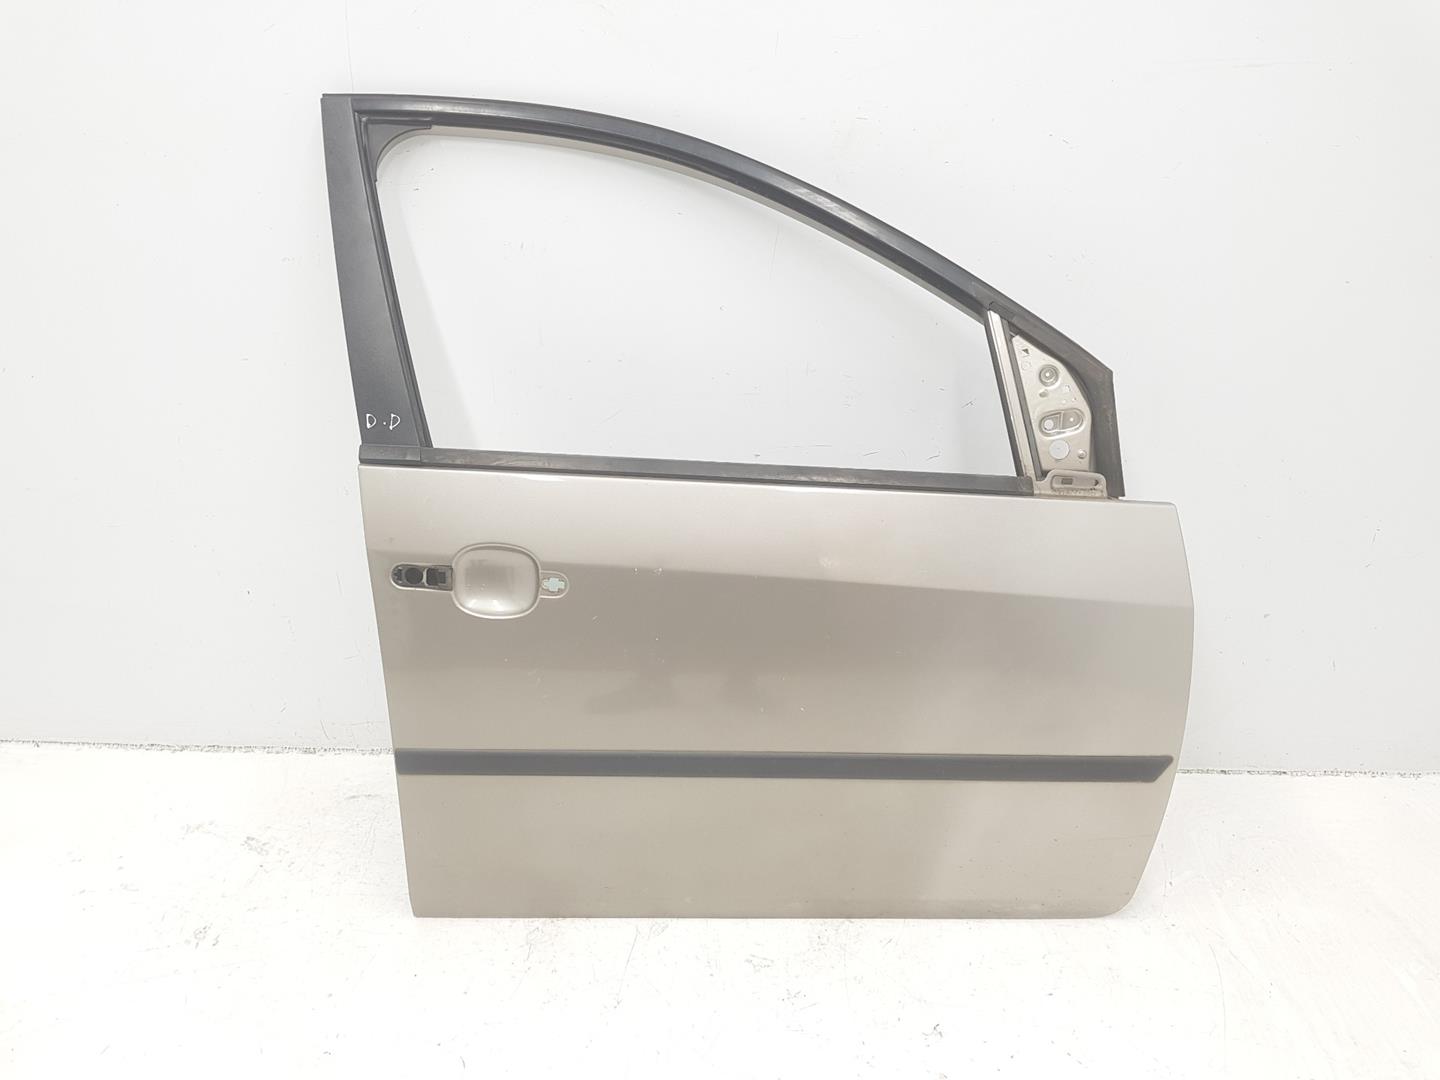 FORD Fiesta 5 generation (2001-2010) Front Right Door 1692523, P2S61A20124KA, COLORPLATAOYSTER 24221913